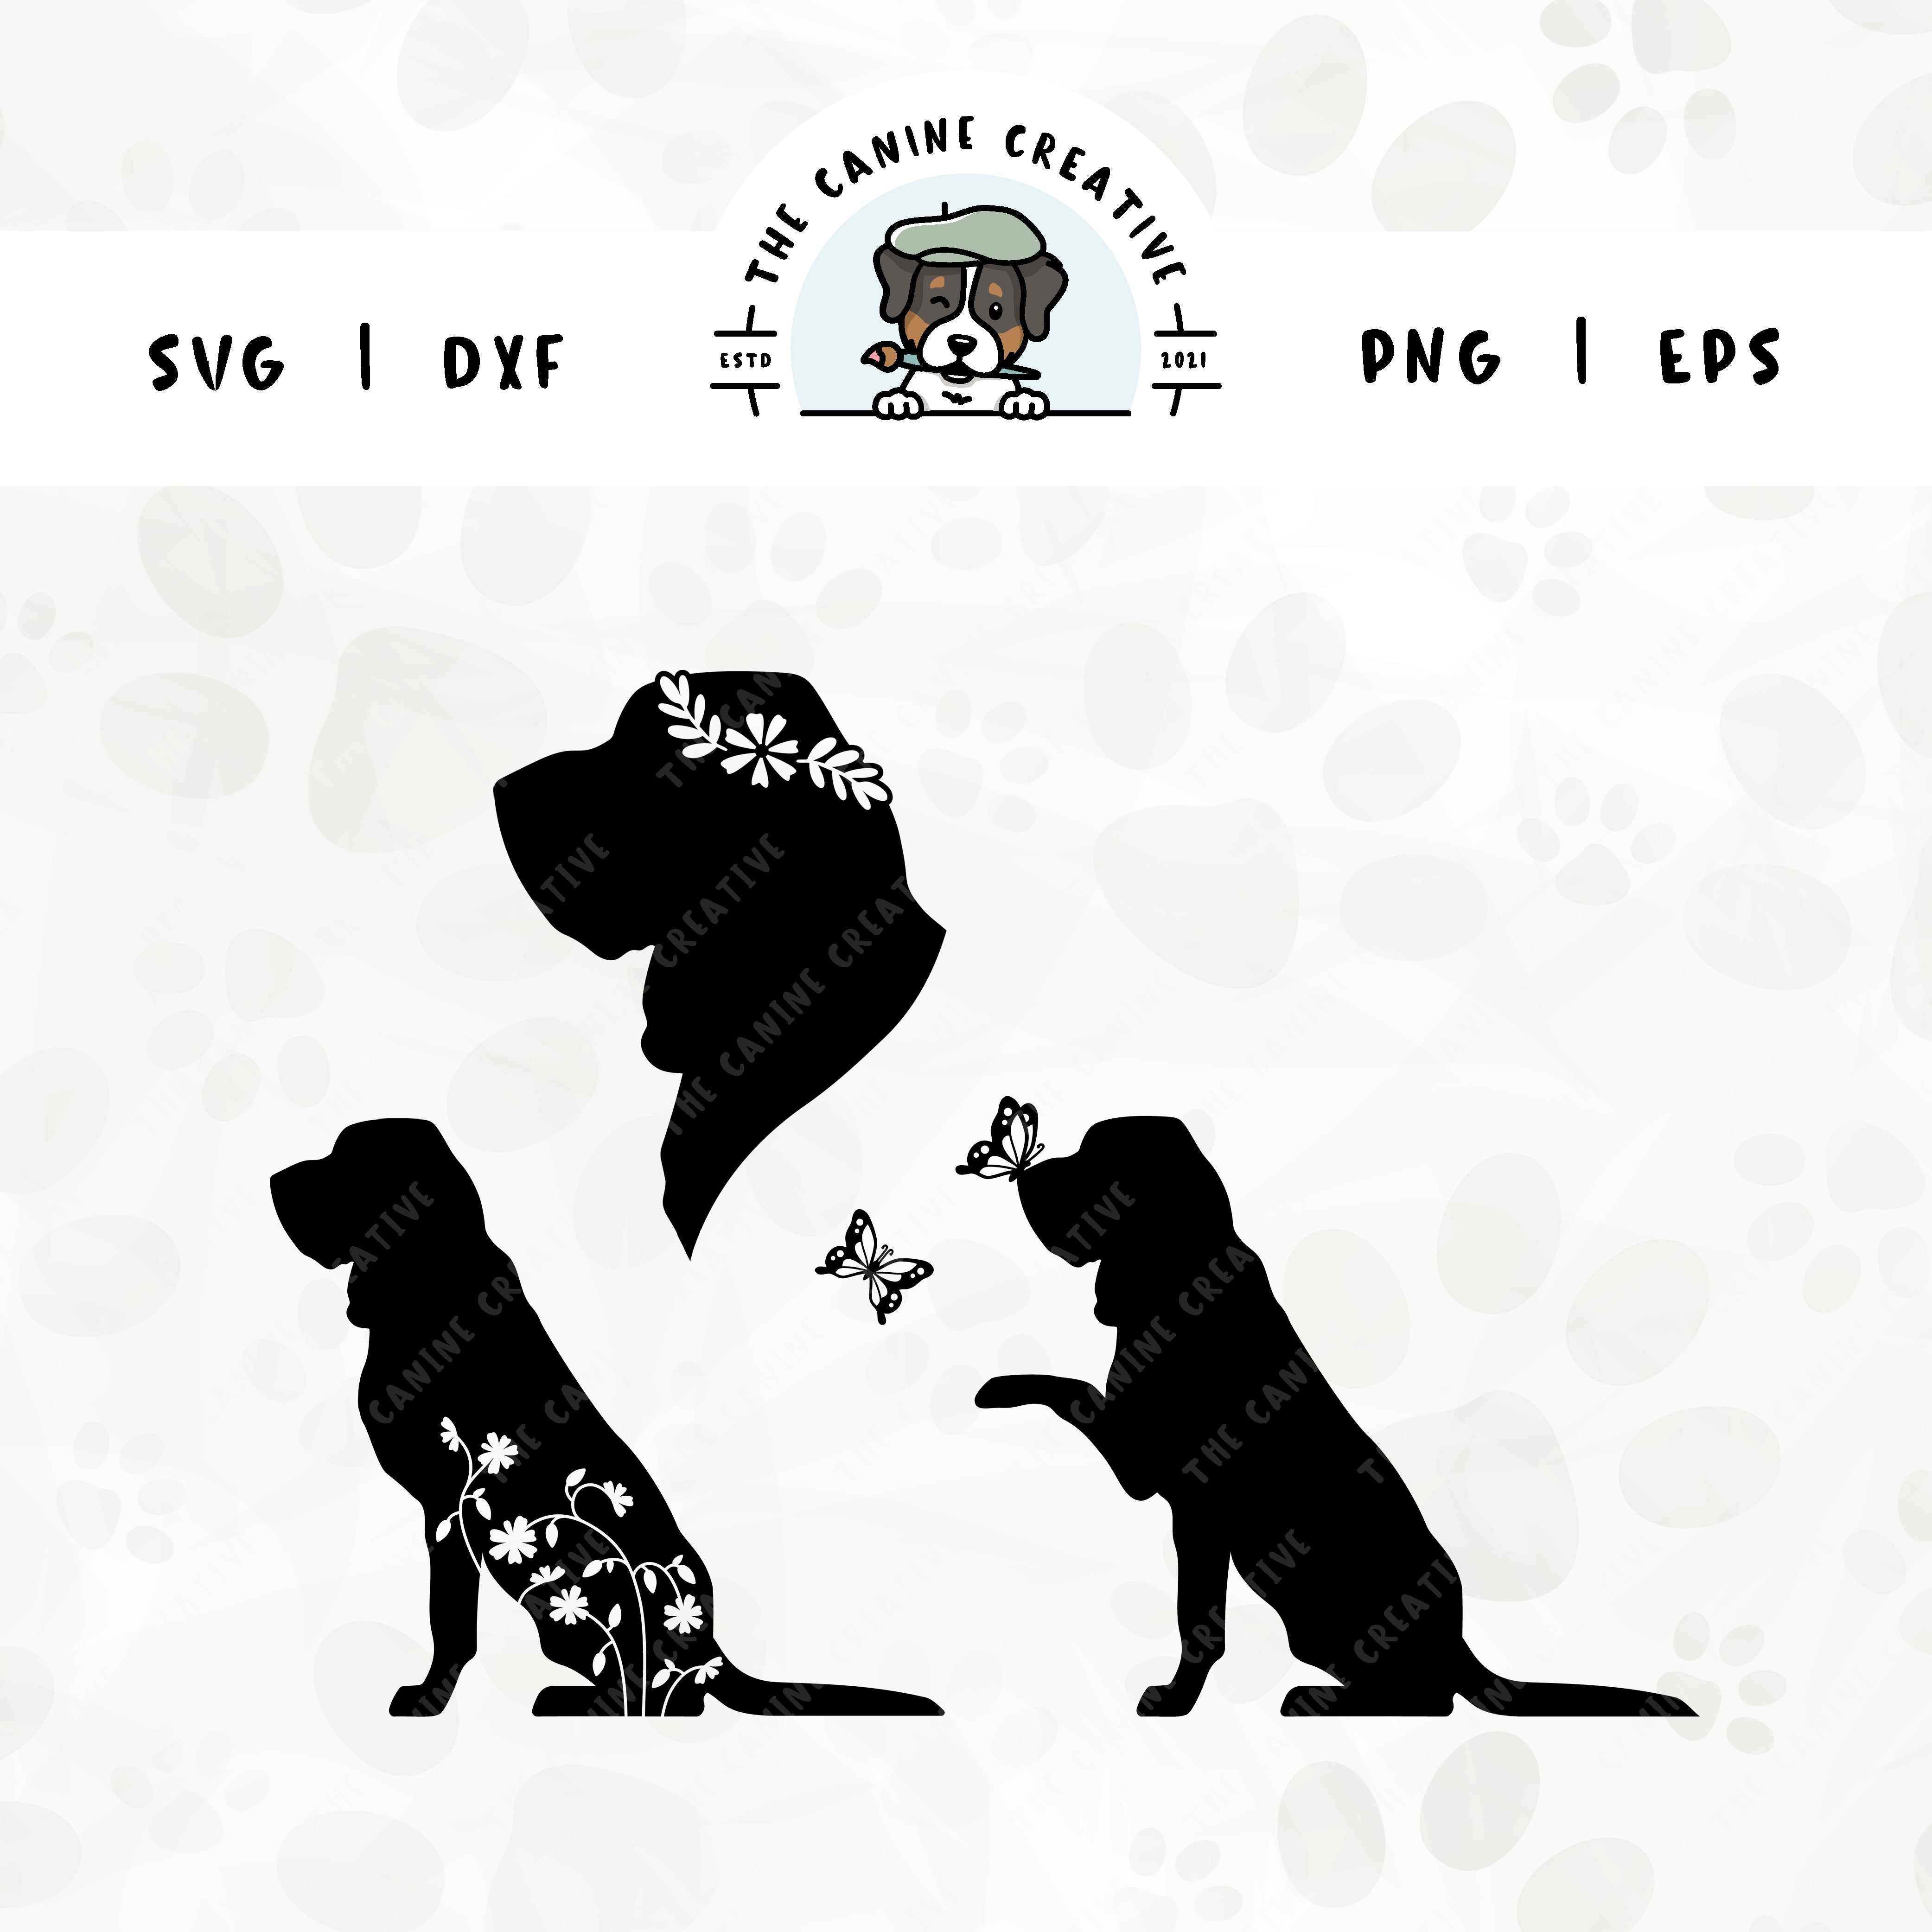 This 3-pack Bloodhound silhouette bundle features a head portrait of a dog wearing a floral crown, a sitting dog with inset flowers, and a dog interacting with butterflies. File formats include: SVG, DXF, PNG, and EPS.